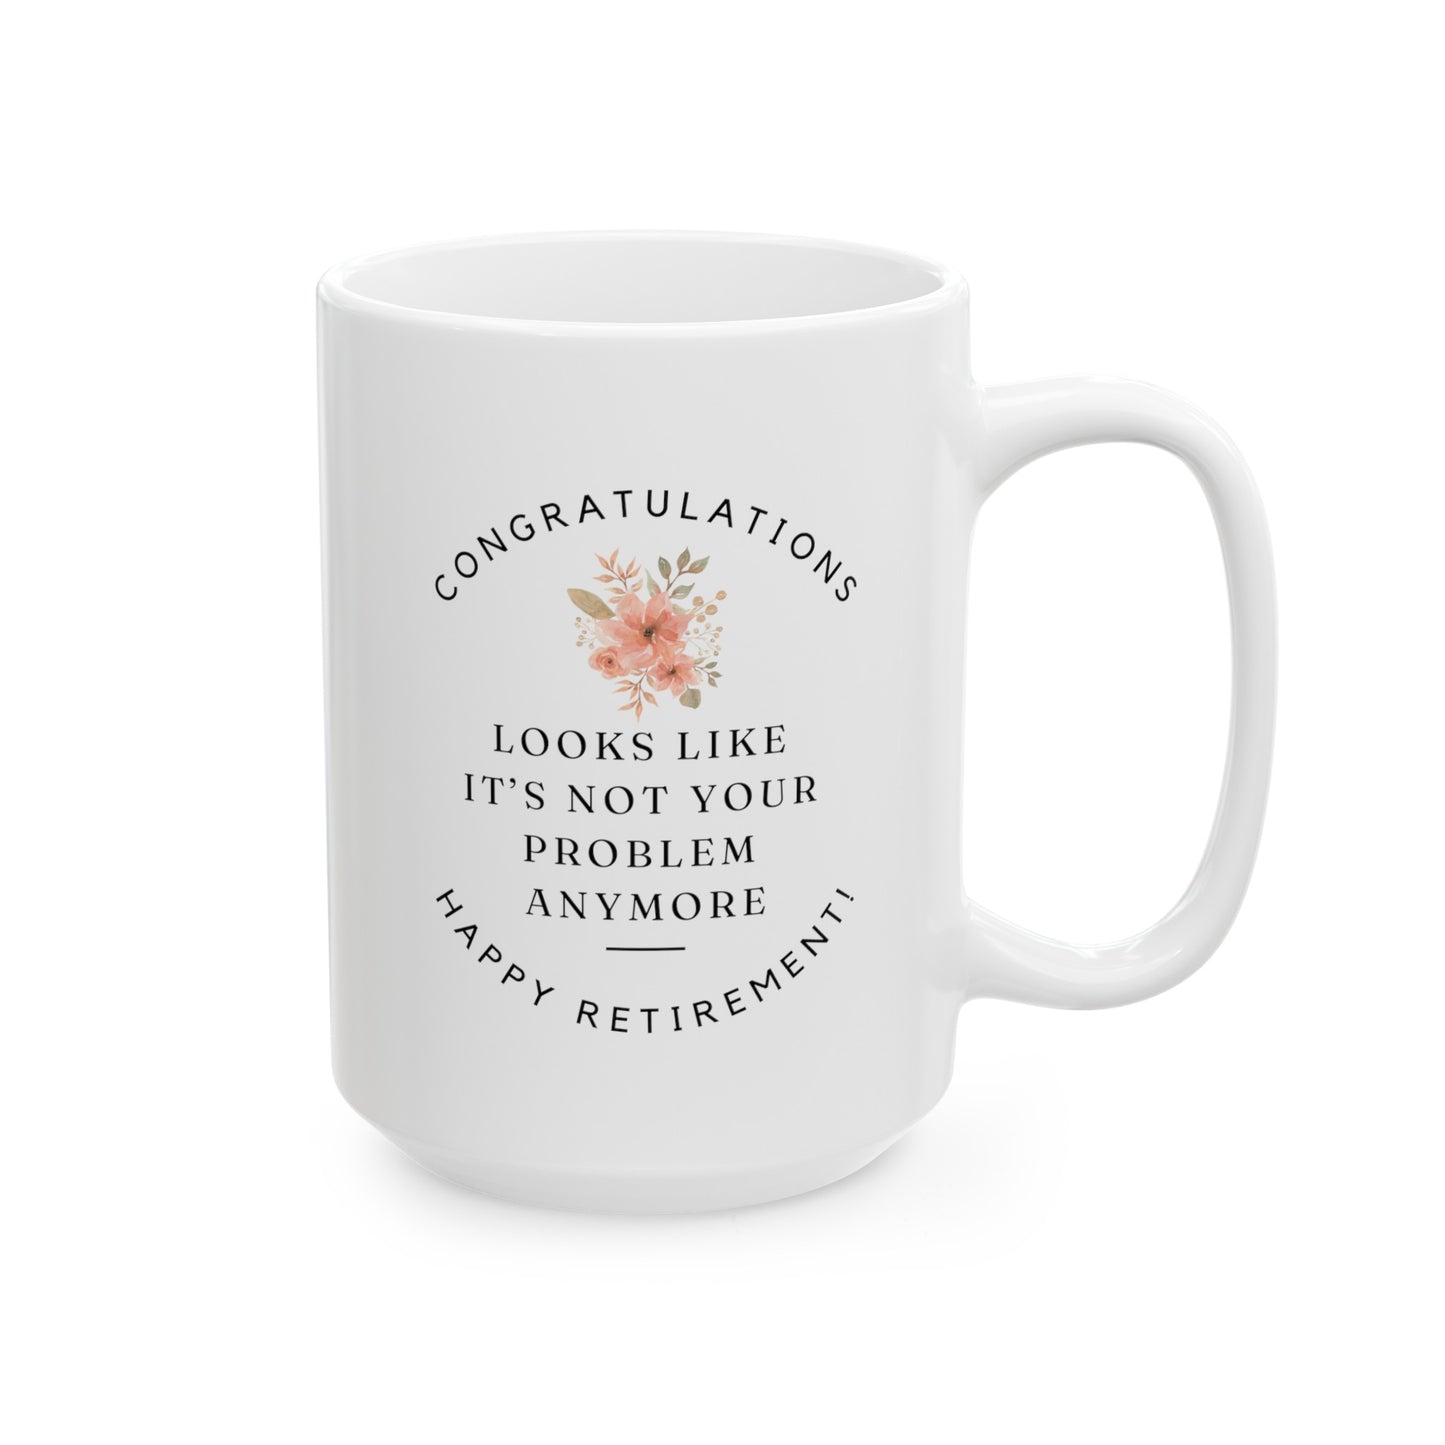 Congratulations Looks Like It's Not Your Problem Anymore Happy Retirement 15oz white funny large big coffee mug tea cup gift for retiree her teacher coworker waveywares wavey wares wavywares wavy wares